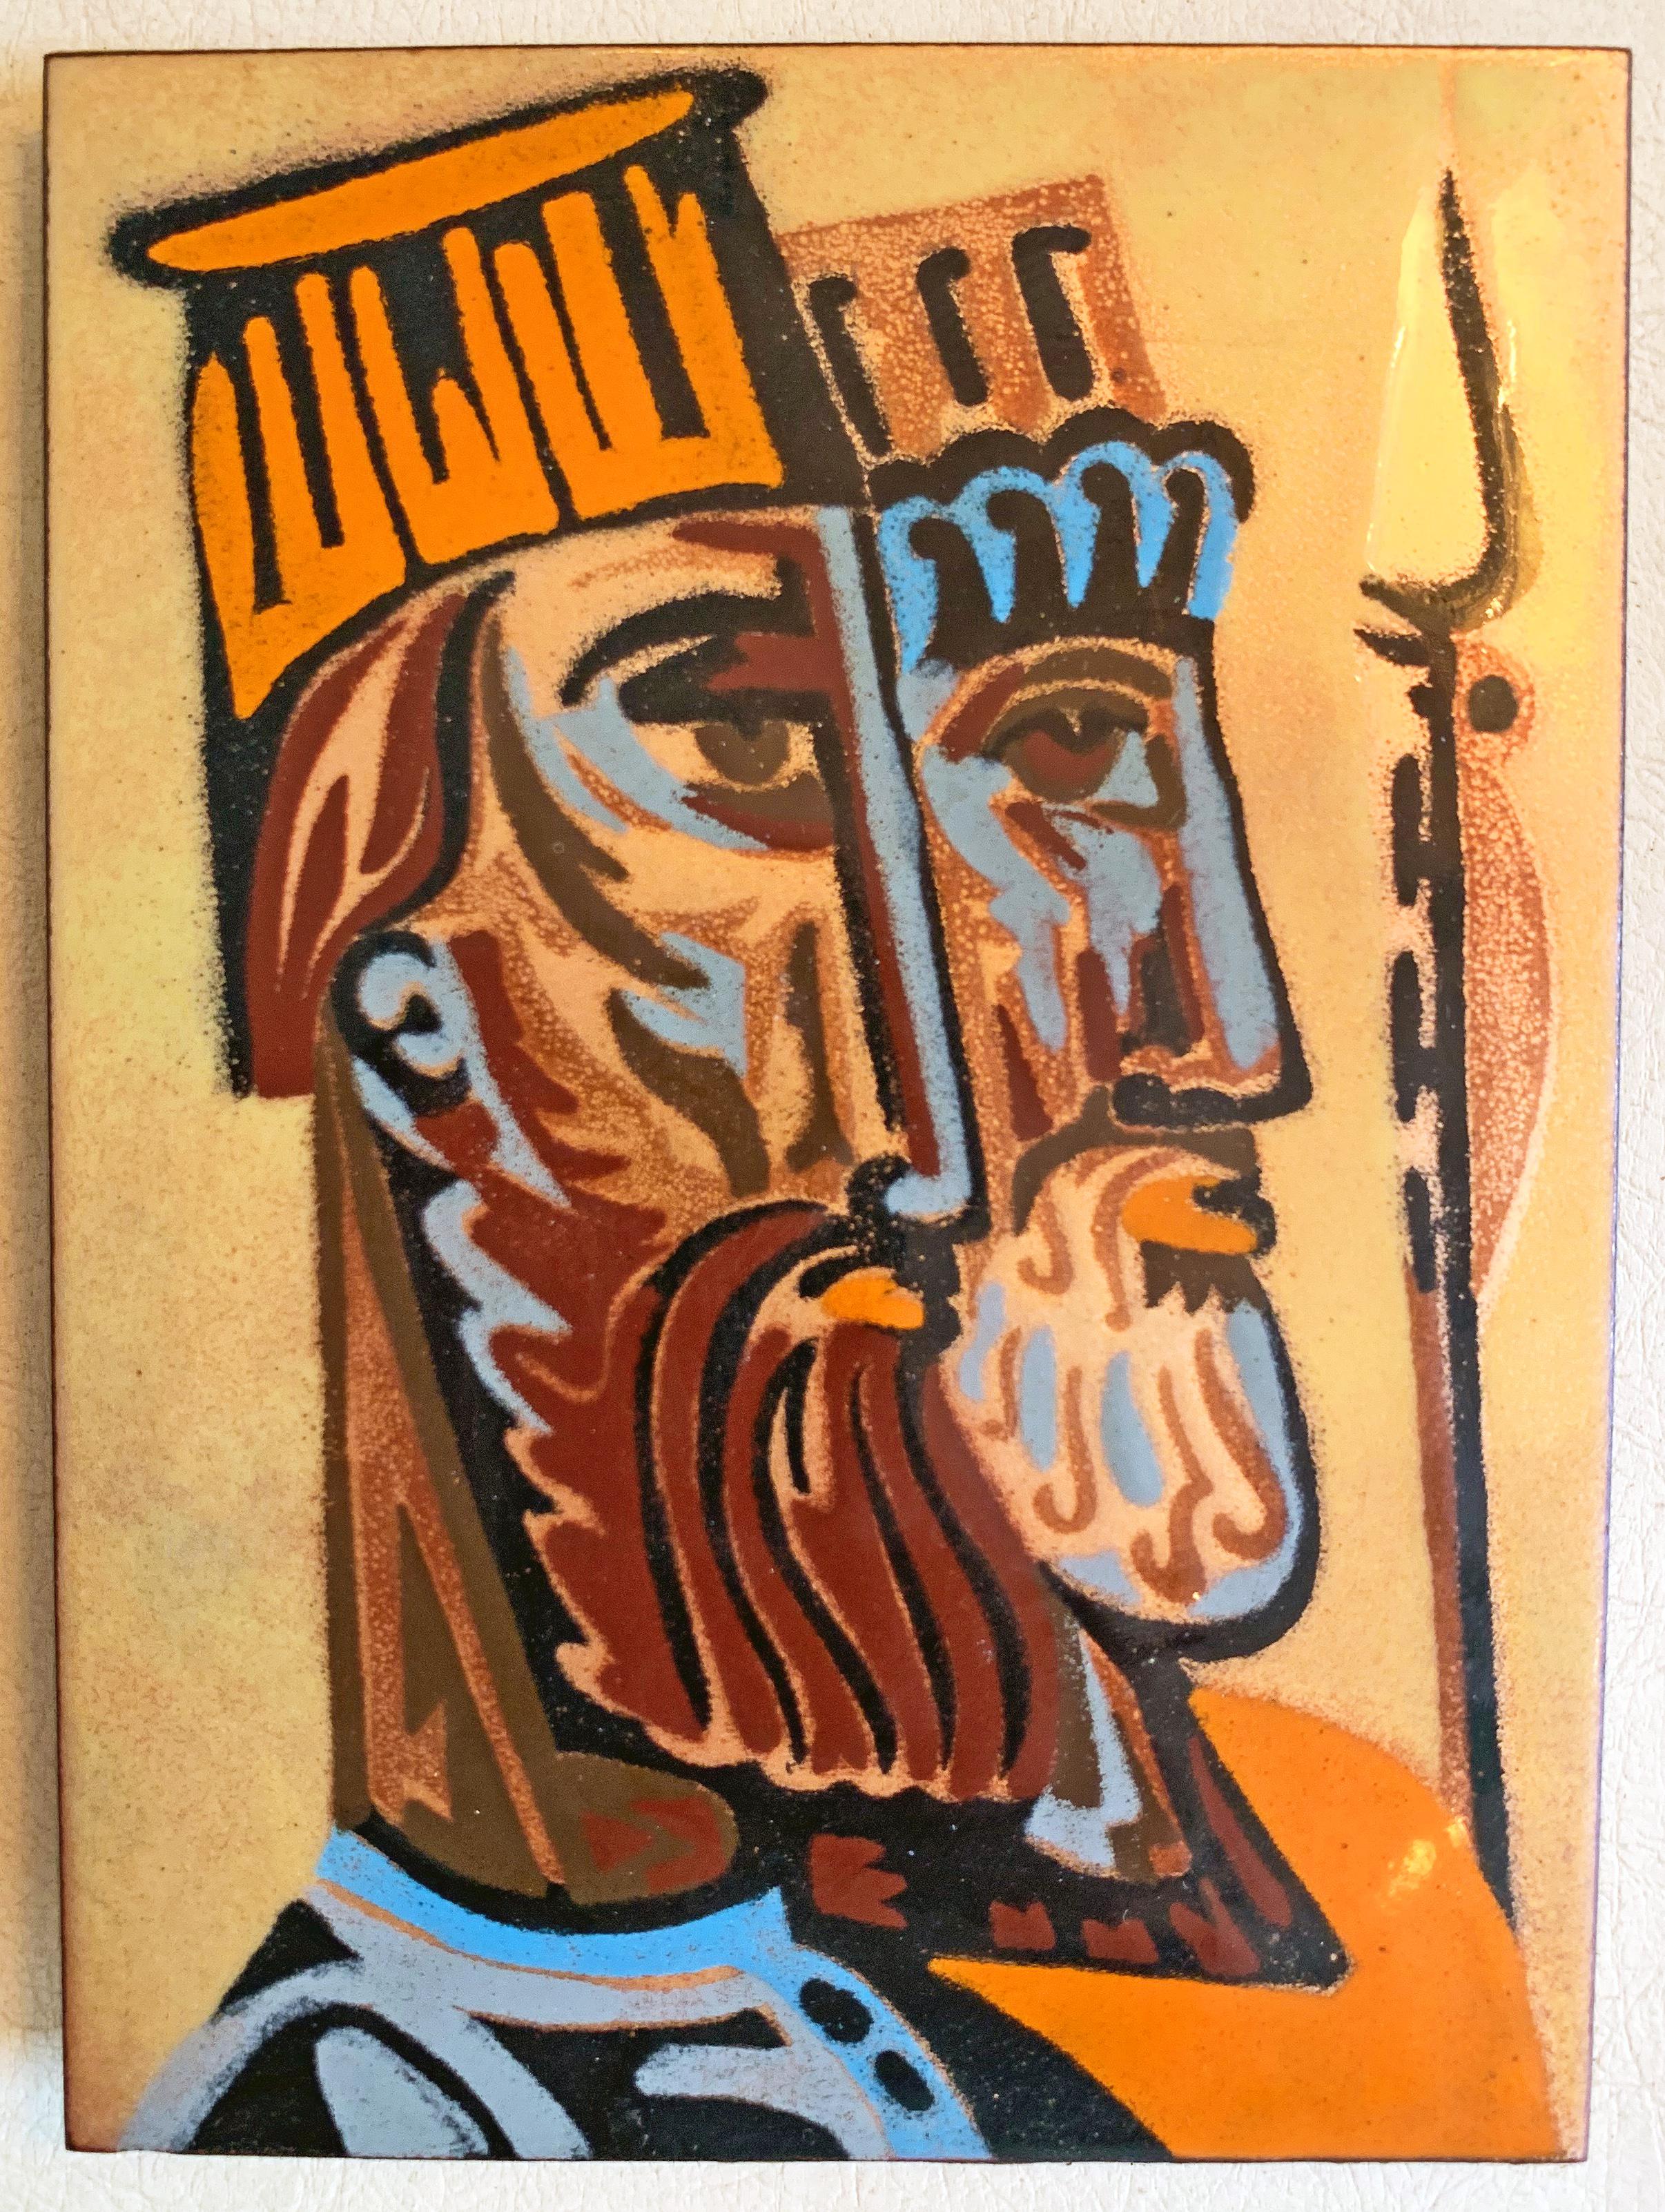 Brilliant and striking examples of midcentury enamel art, this pair of panels showing ancient soldiers with helmets and spears is not signed, but each is superb in craftsmanship and palette. They each exhibit the orange and yellow hues that are